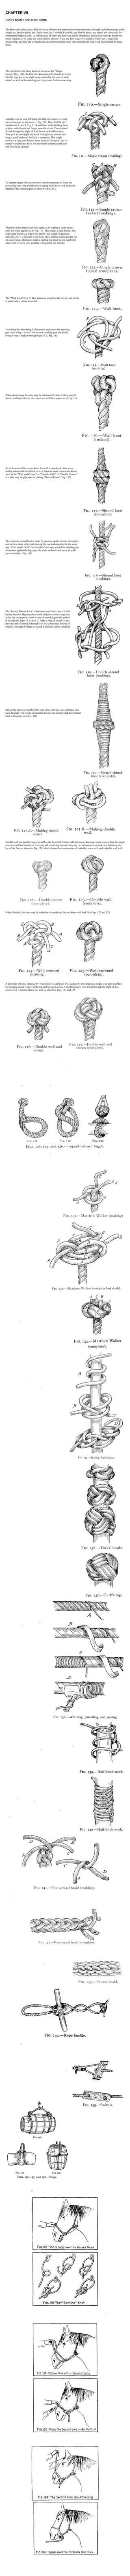 Knots, Splices and Rope Work, by A. Hyatt Verrill - Chapter 7 - Fancy Knots  And Rope Work